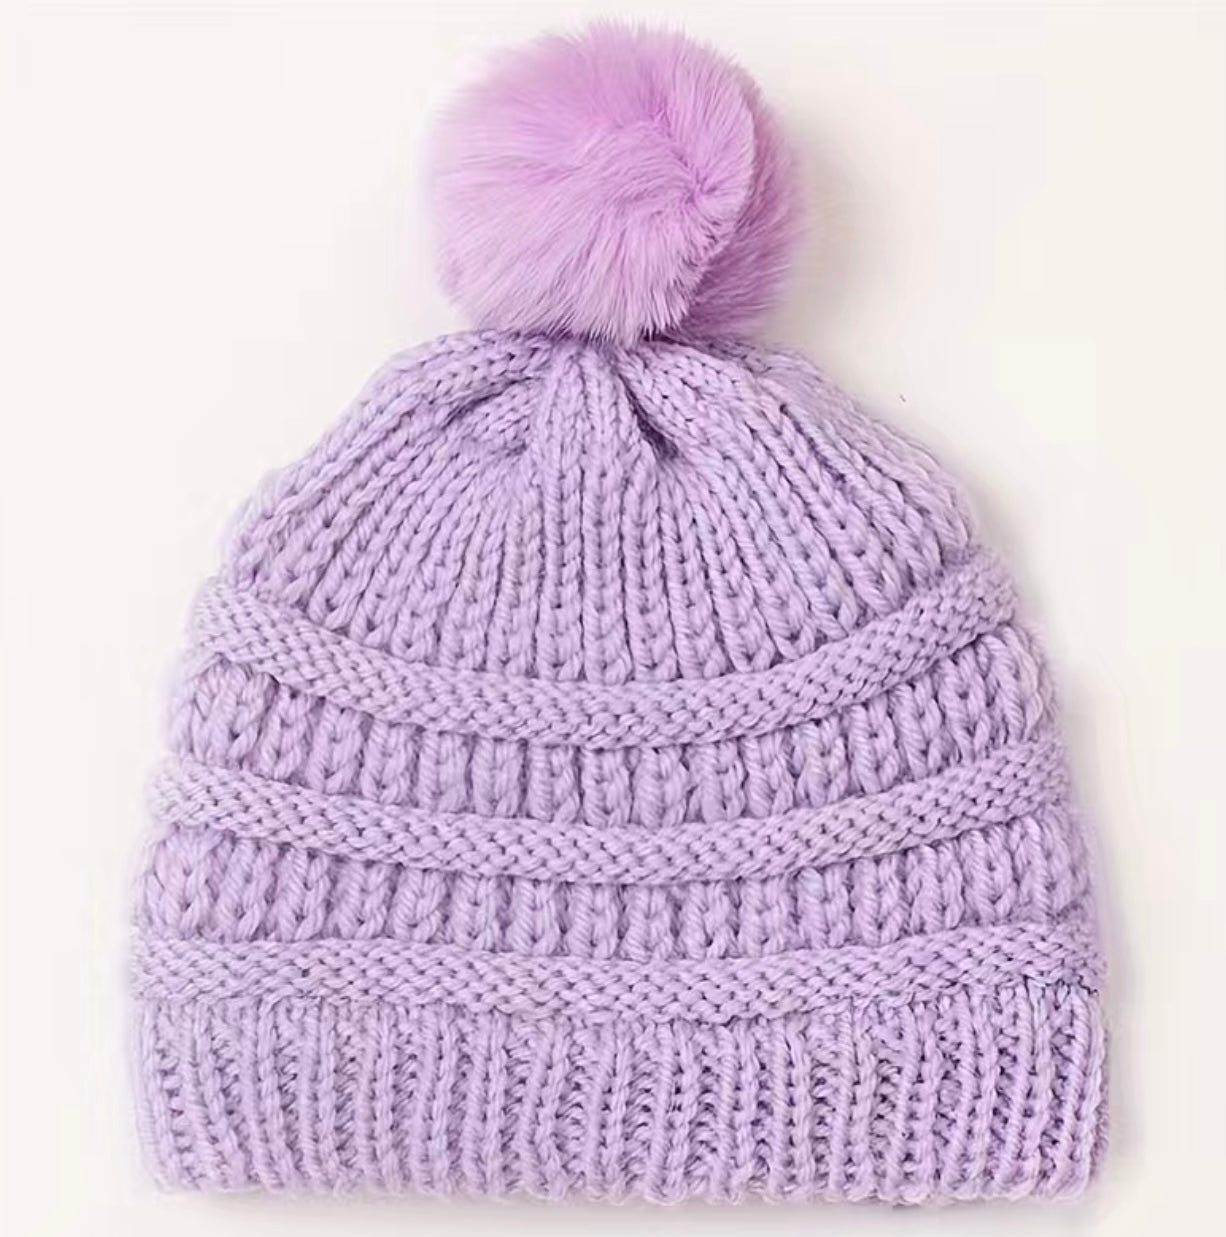 Knitted Puff Ball Hat